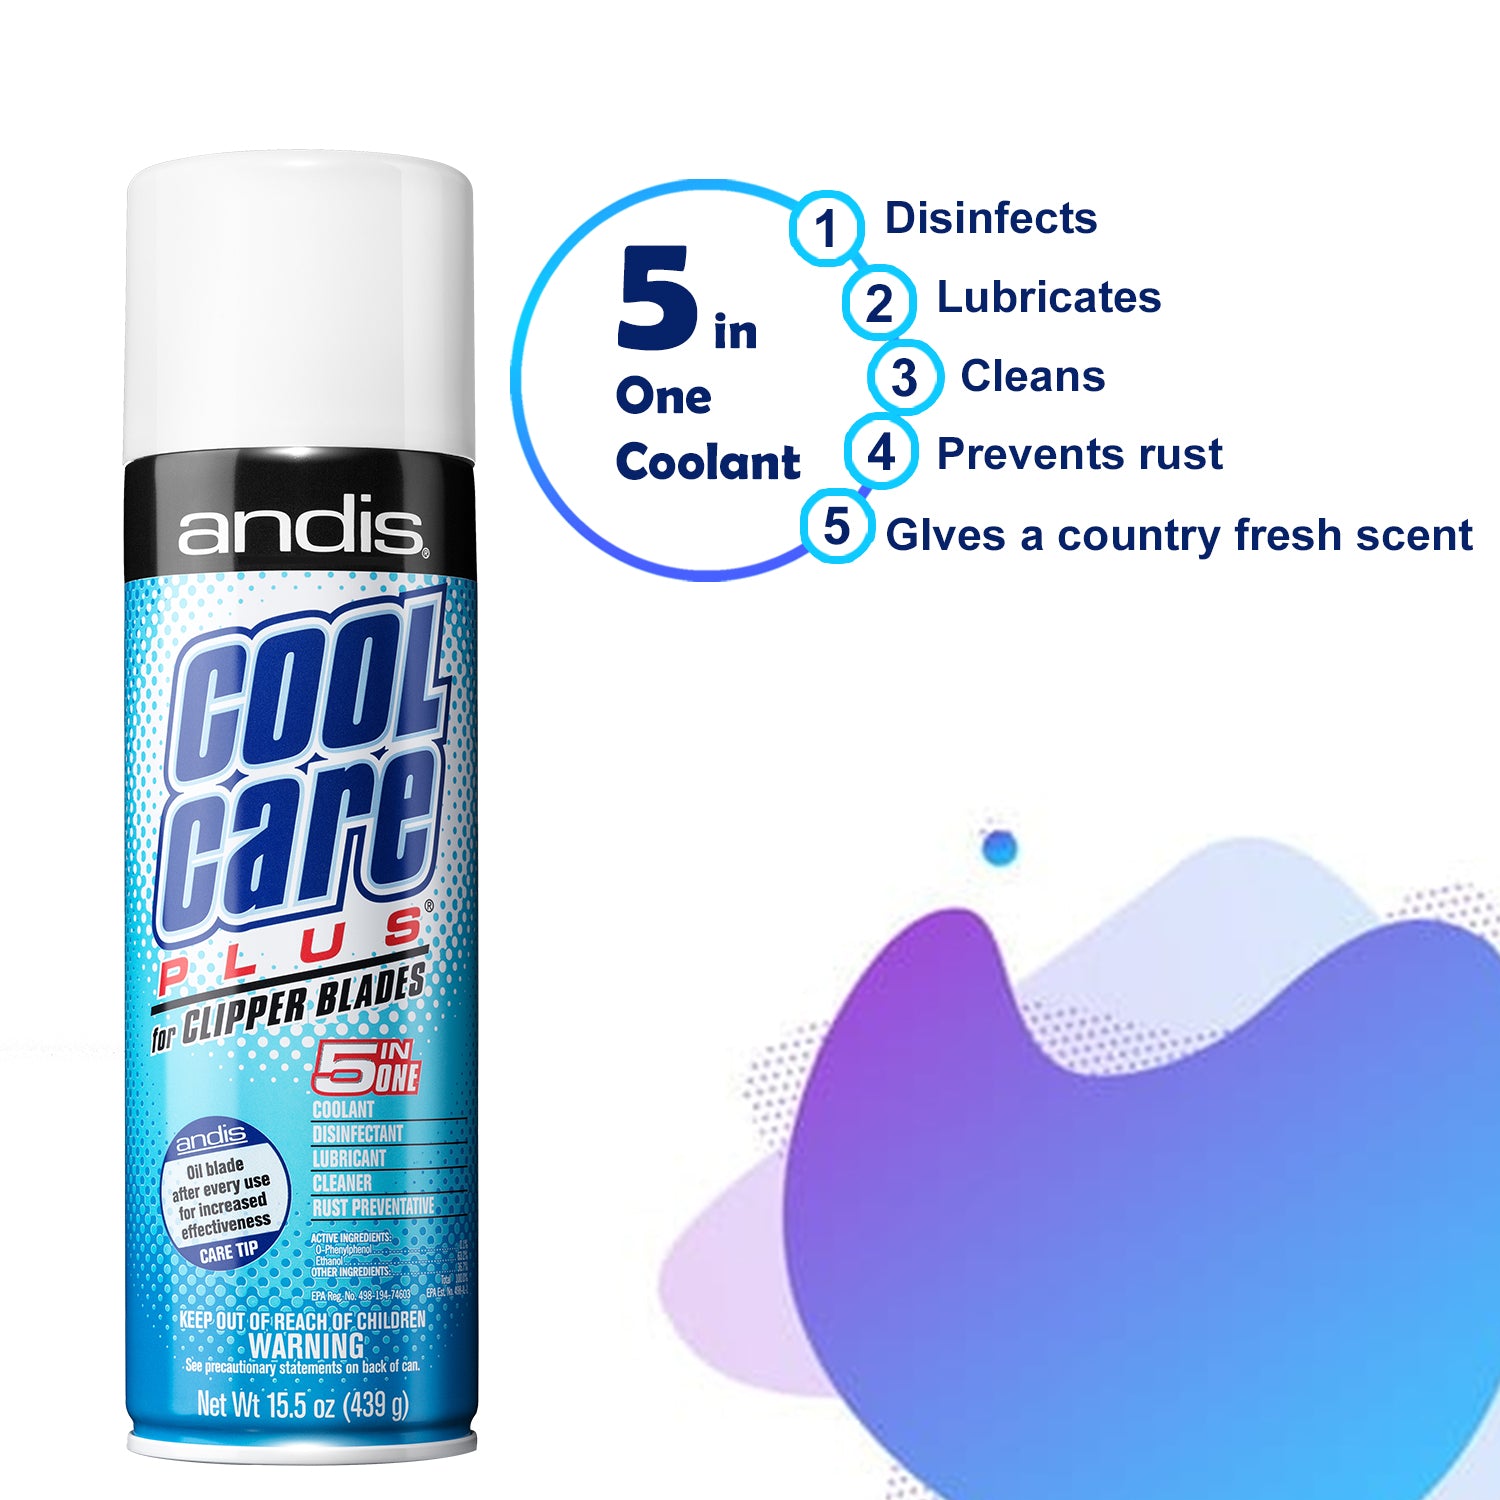 Andis UltraEdge Size 10 Blade & 5-in-1 Cool Care Plus Spray Combo